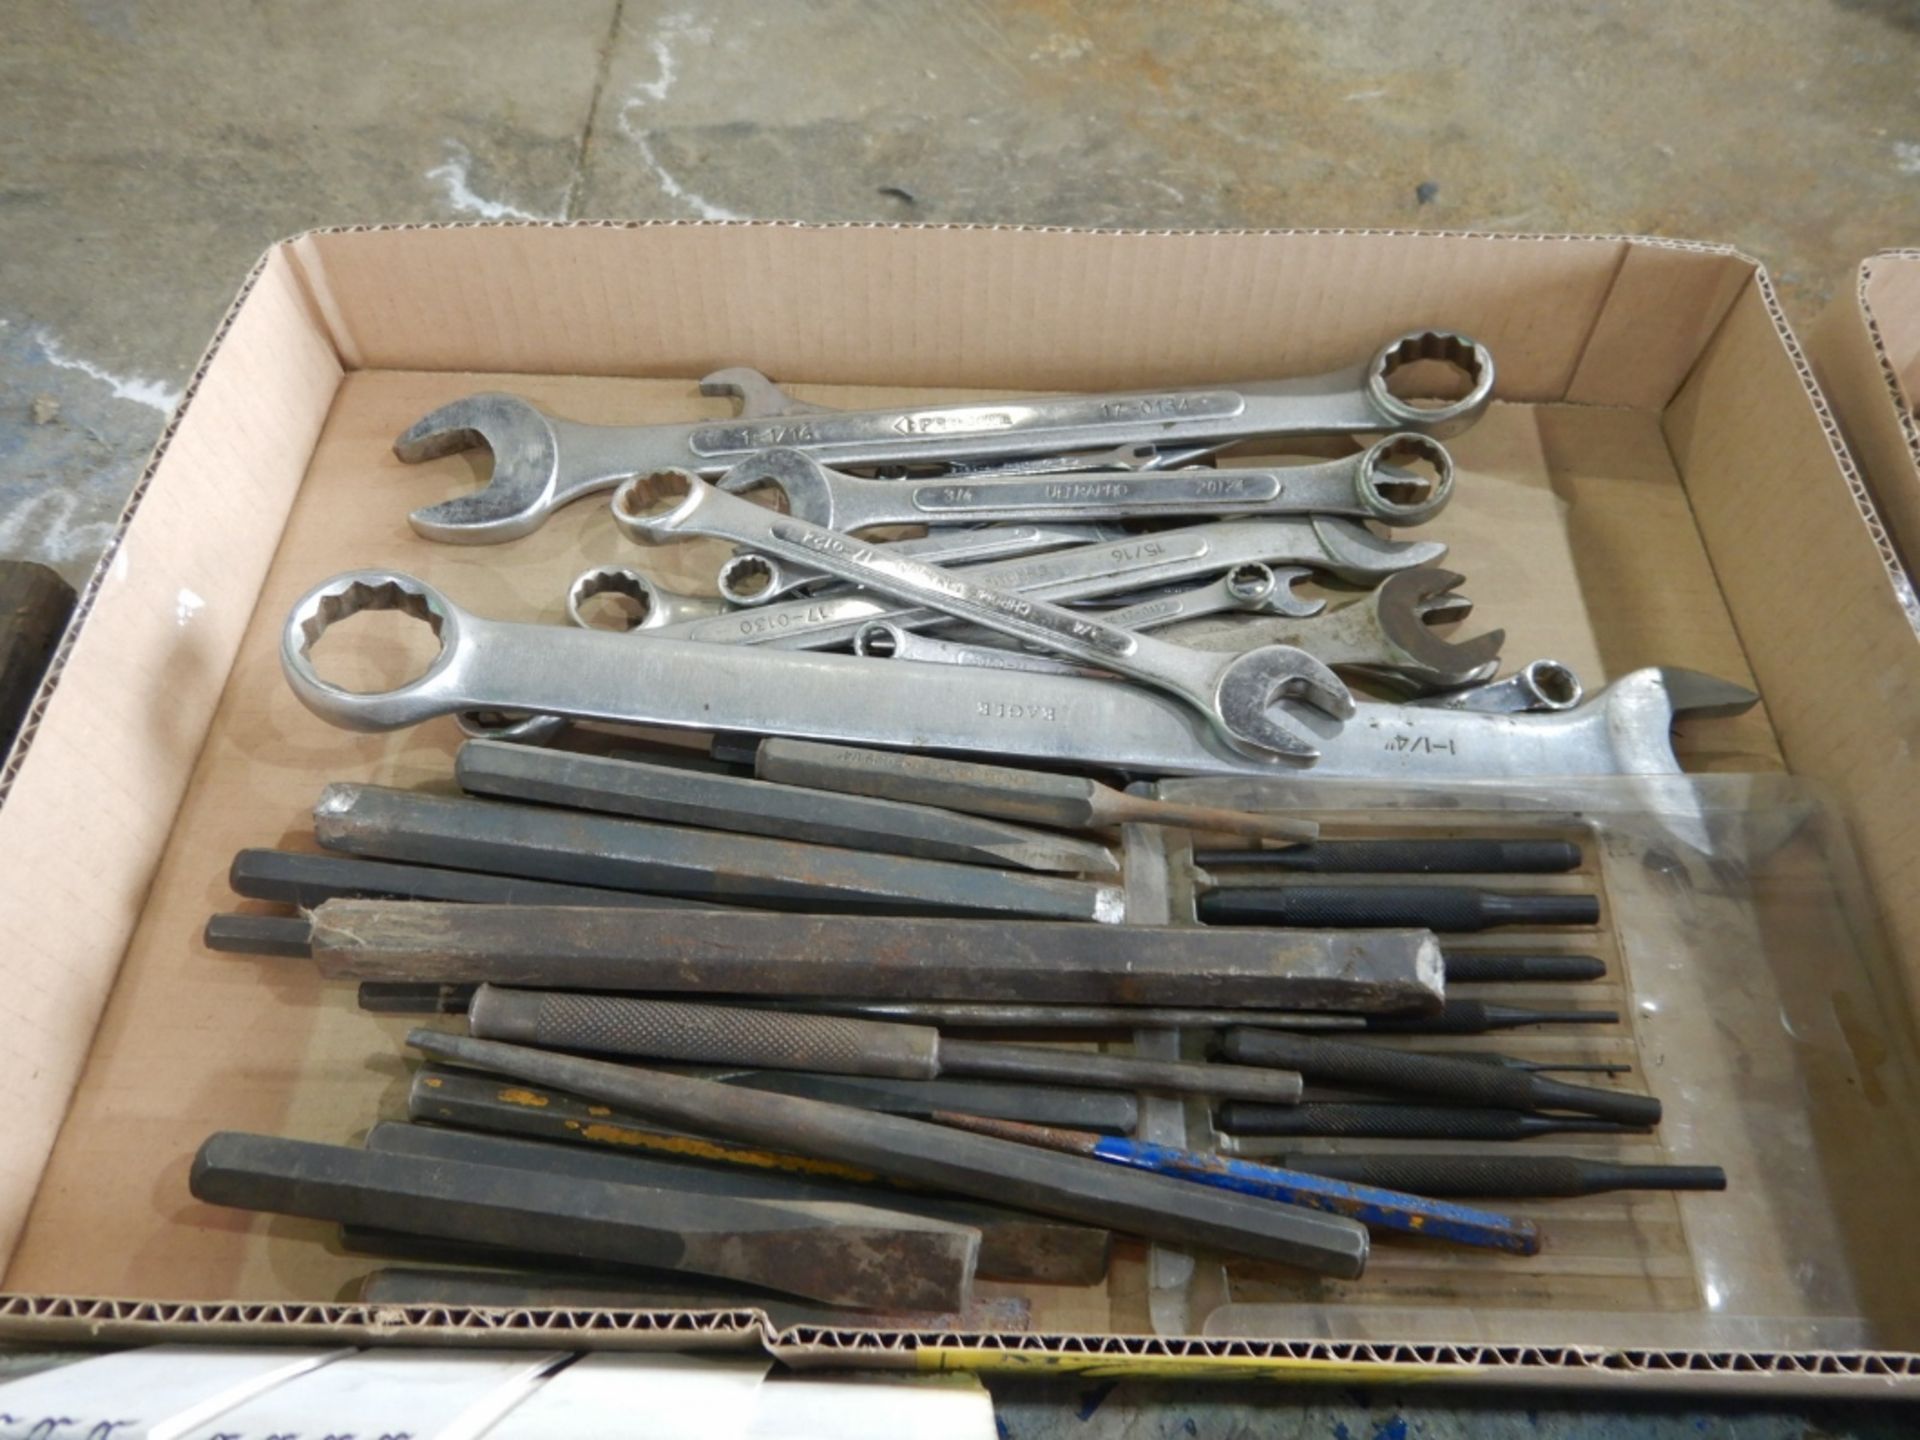 L/O PUNCHES & CHISELS, COMBINATION WRENCHES, SCREW DRIVERS, DRIVE ASSORTMENT KIT, ETC - Image 3 of 3